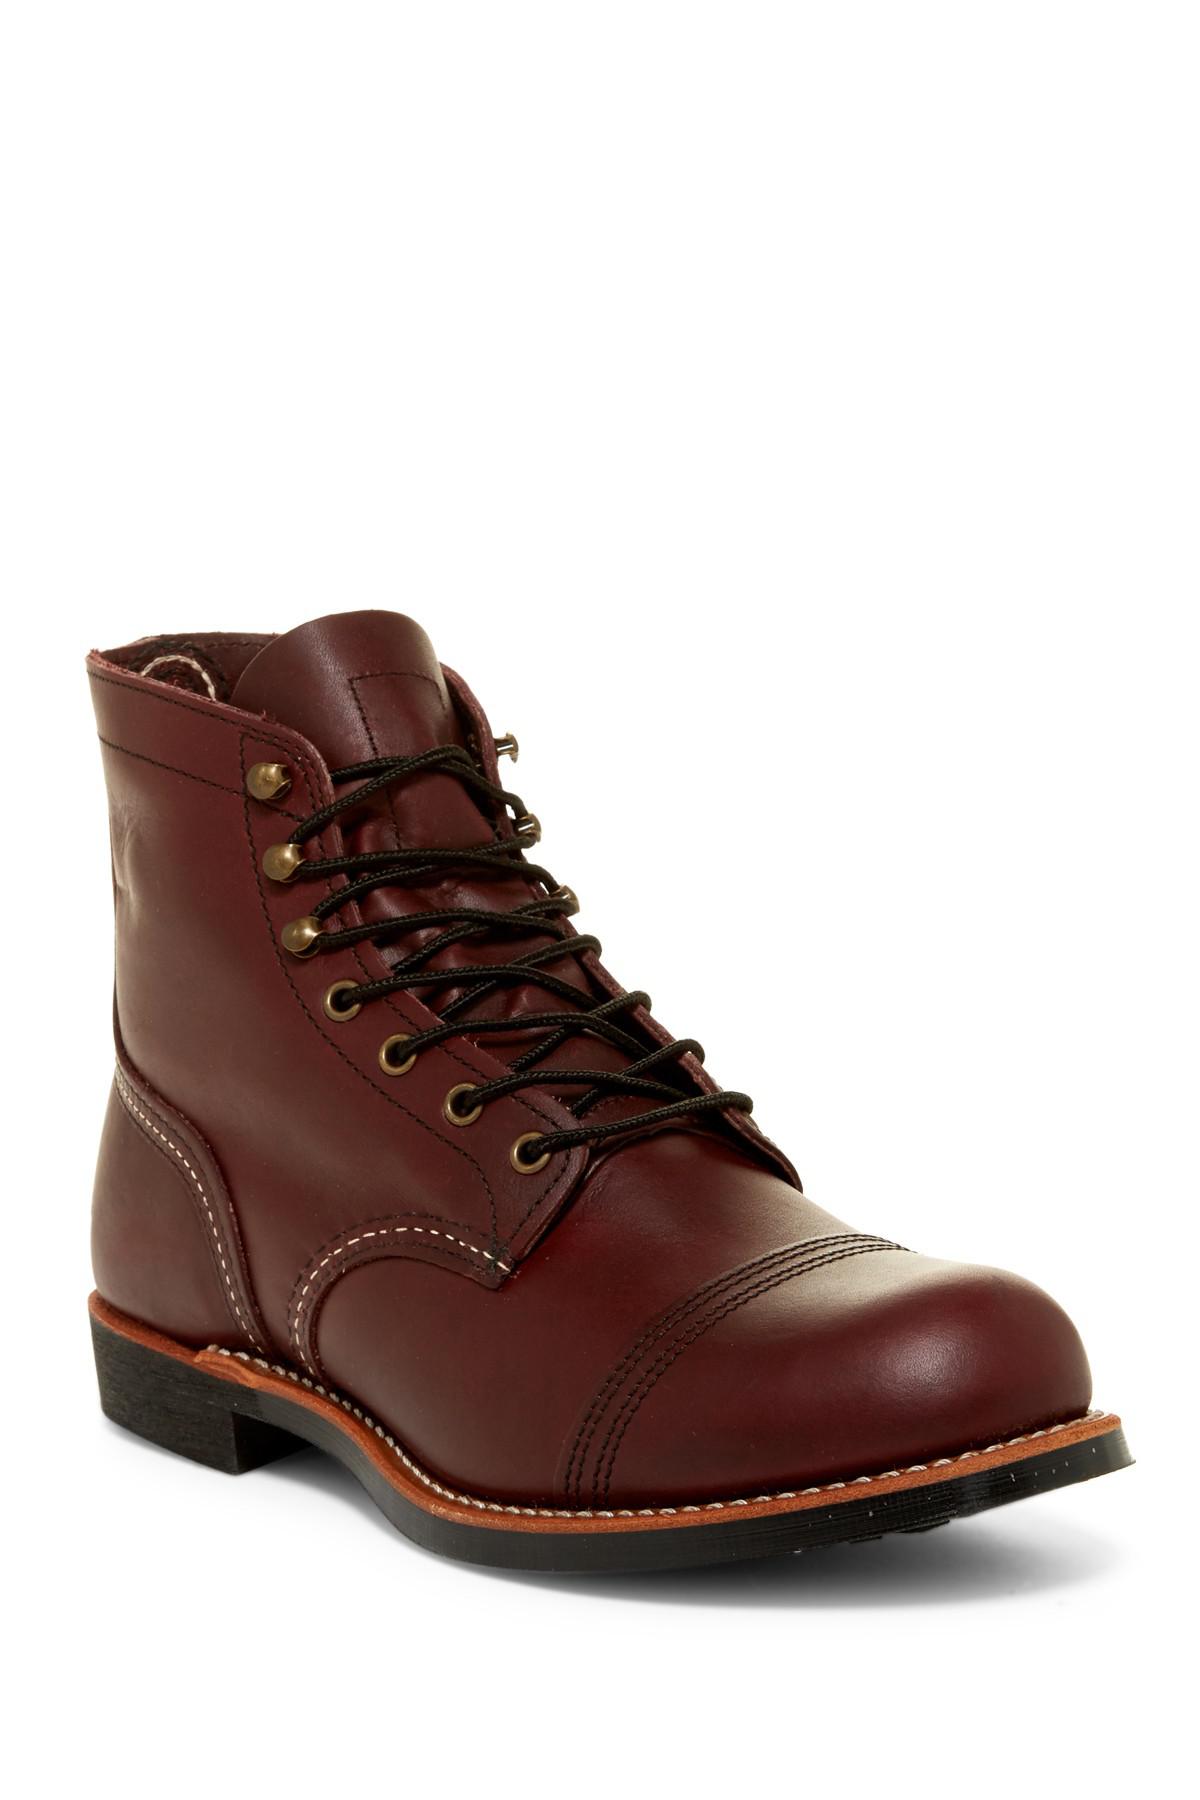 red wing boots seconds